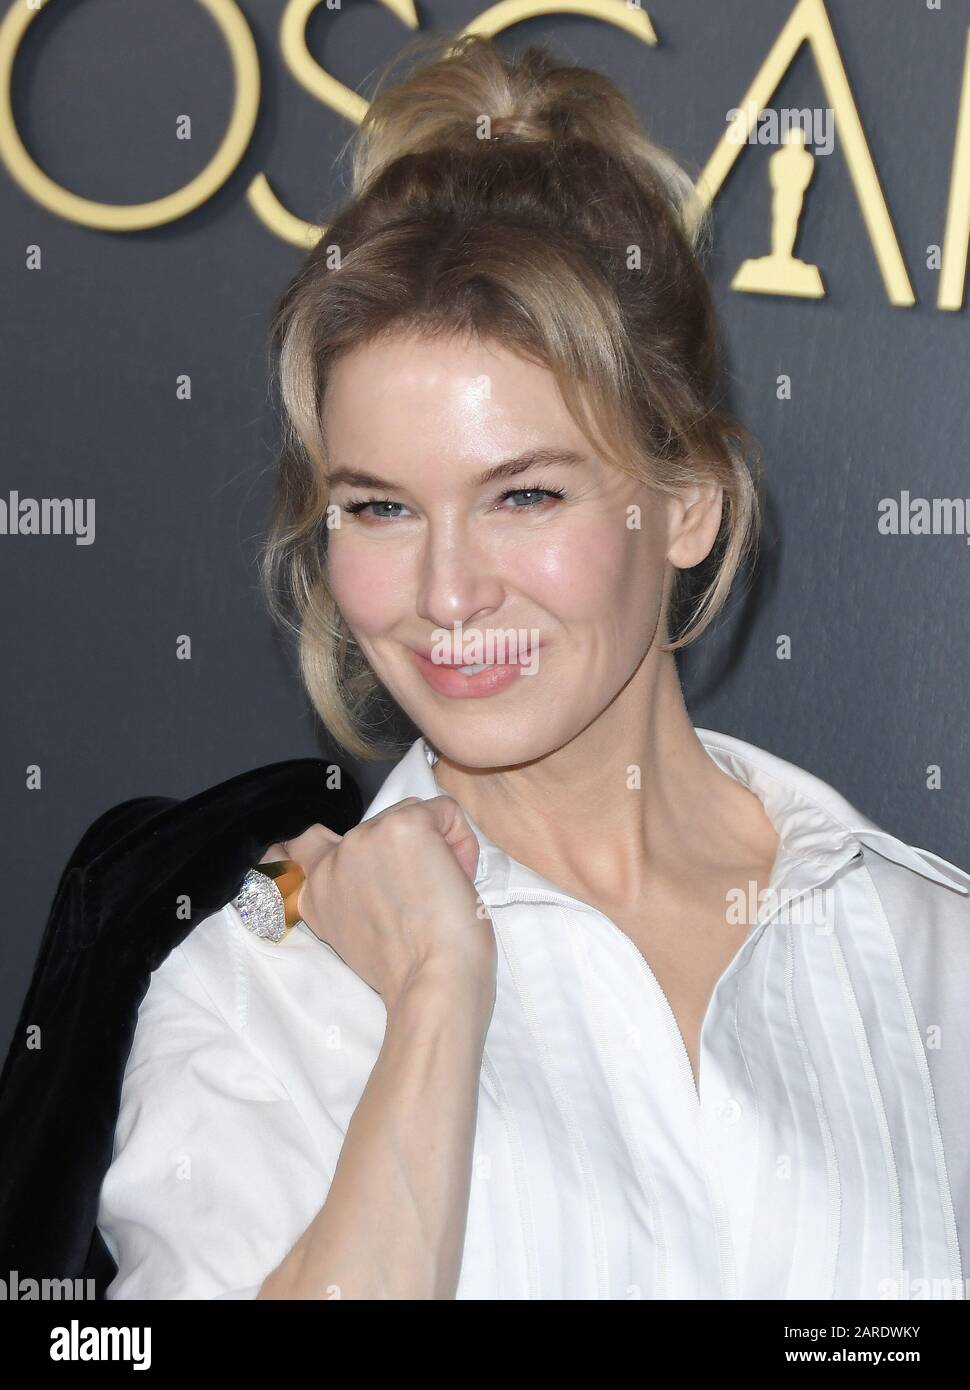 Los Angeles, USA. 27th Jan 2020. Renée Zellweger arrives at the 92nd Oscars Nominees Luncheon held at the Ray Dolby Ballroom at Hollywood & Highland in Hollywood, CA on Monday, ?January 27, 2020. (Photo By Sthanlee B. Mirador/Sipa USA) Credit: Sipa USA/Alamy Live News Stock Photo